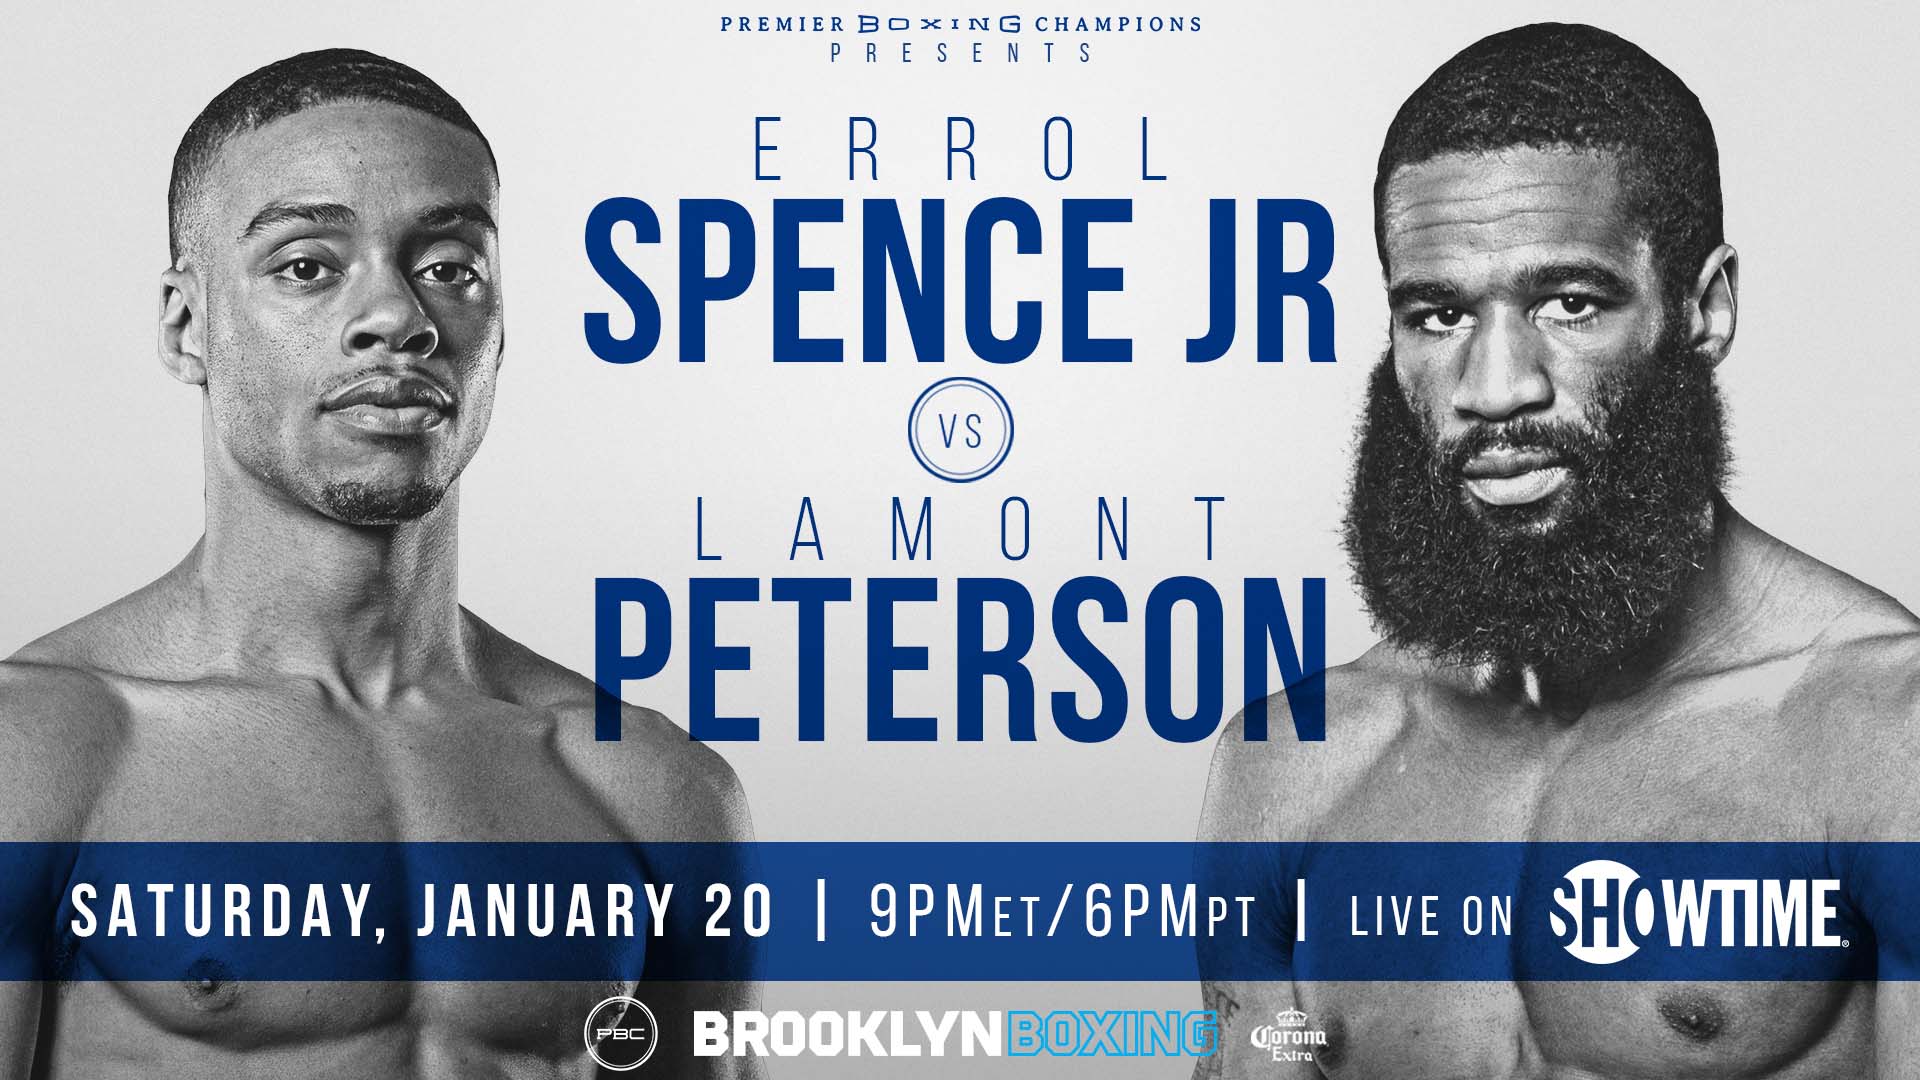 Boxing Odds: Spence Vs. Peterson